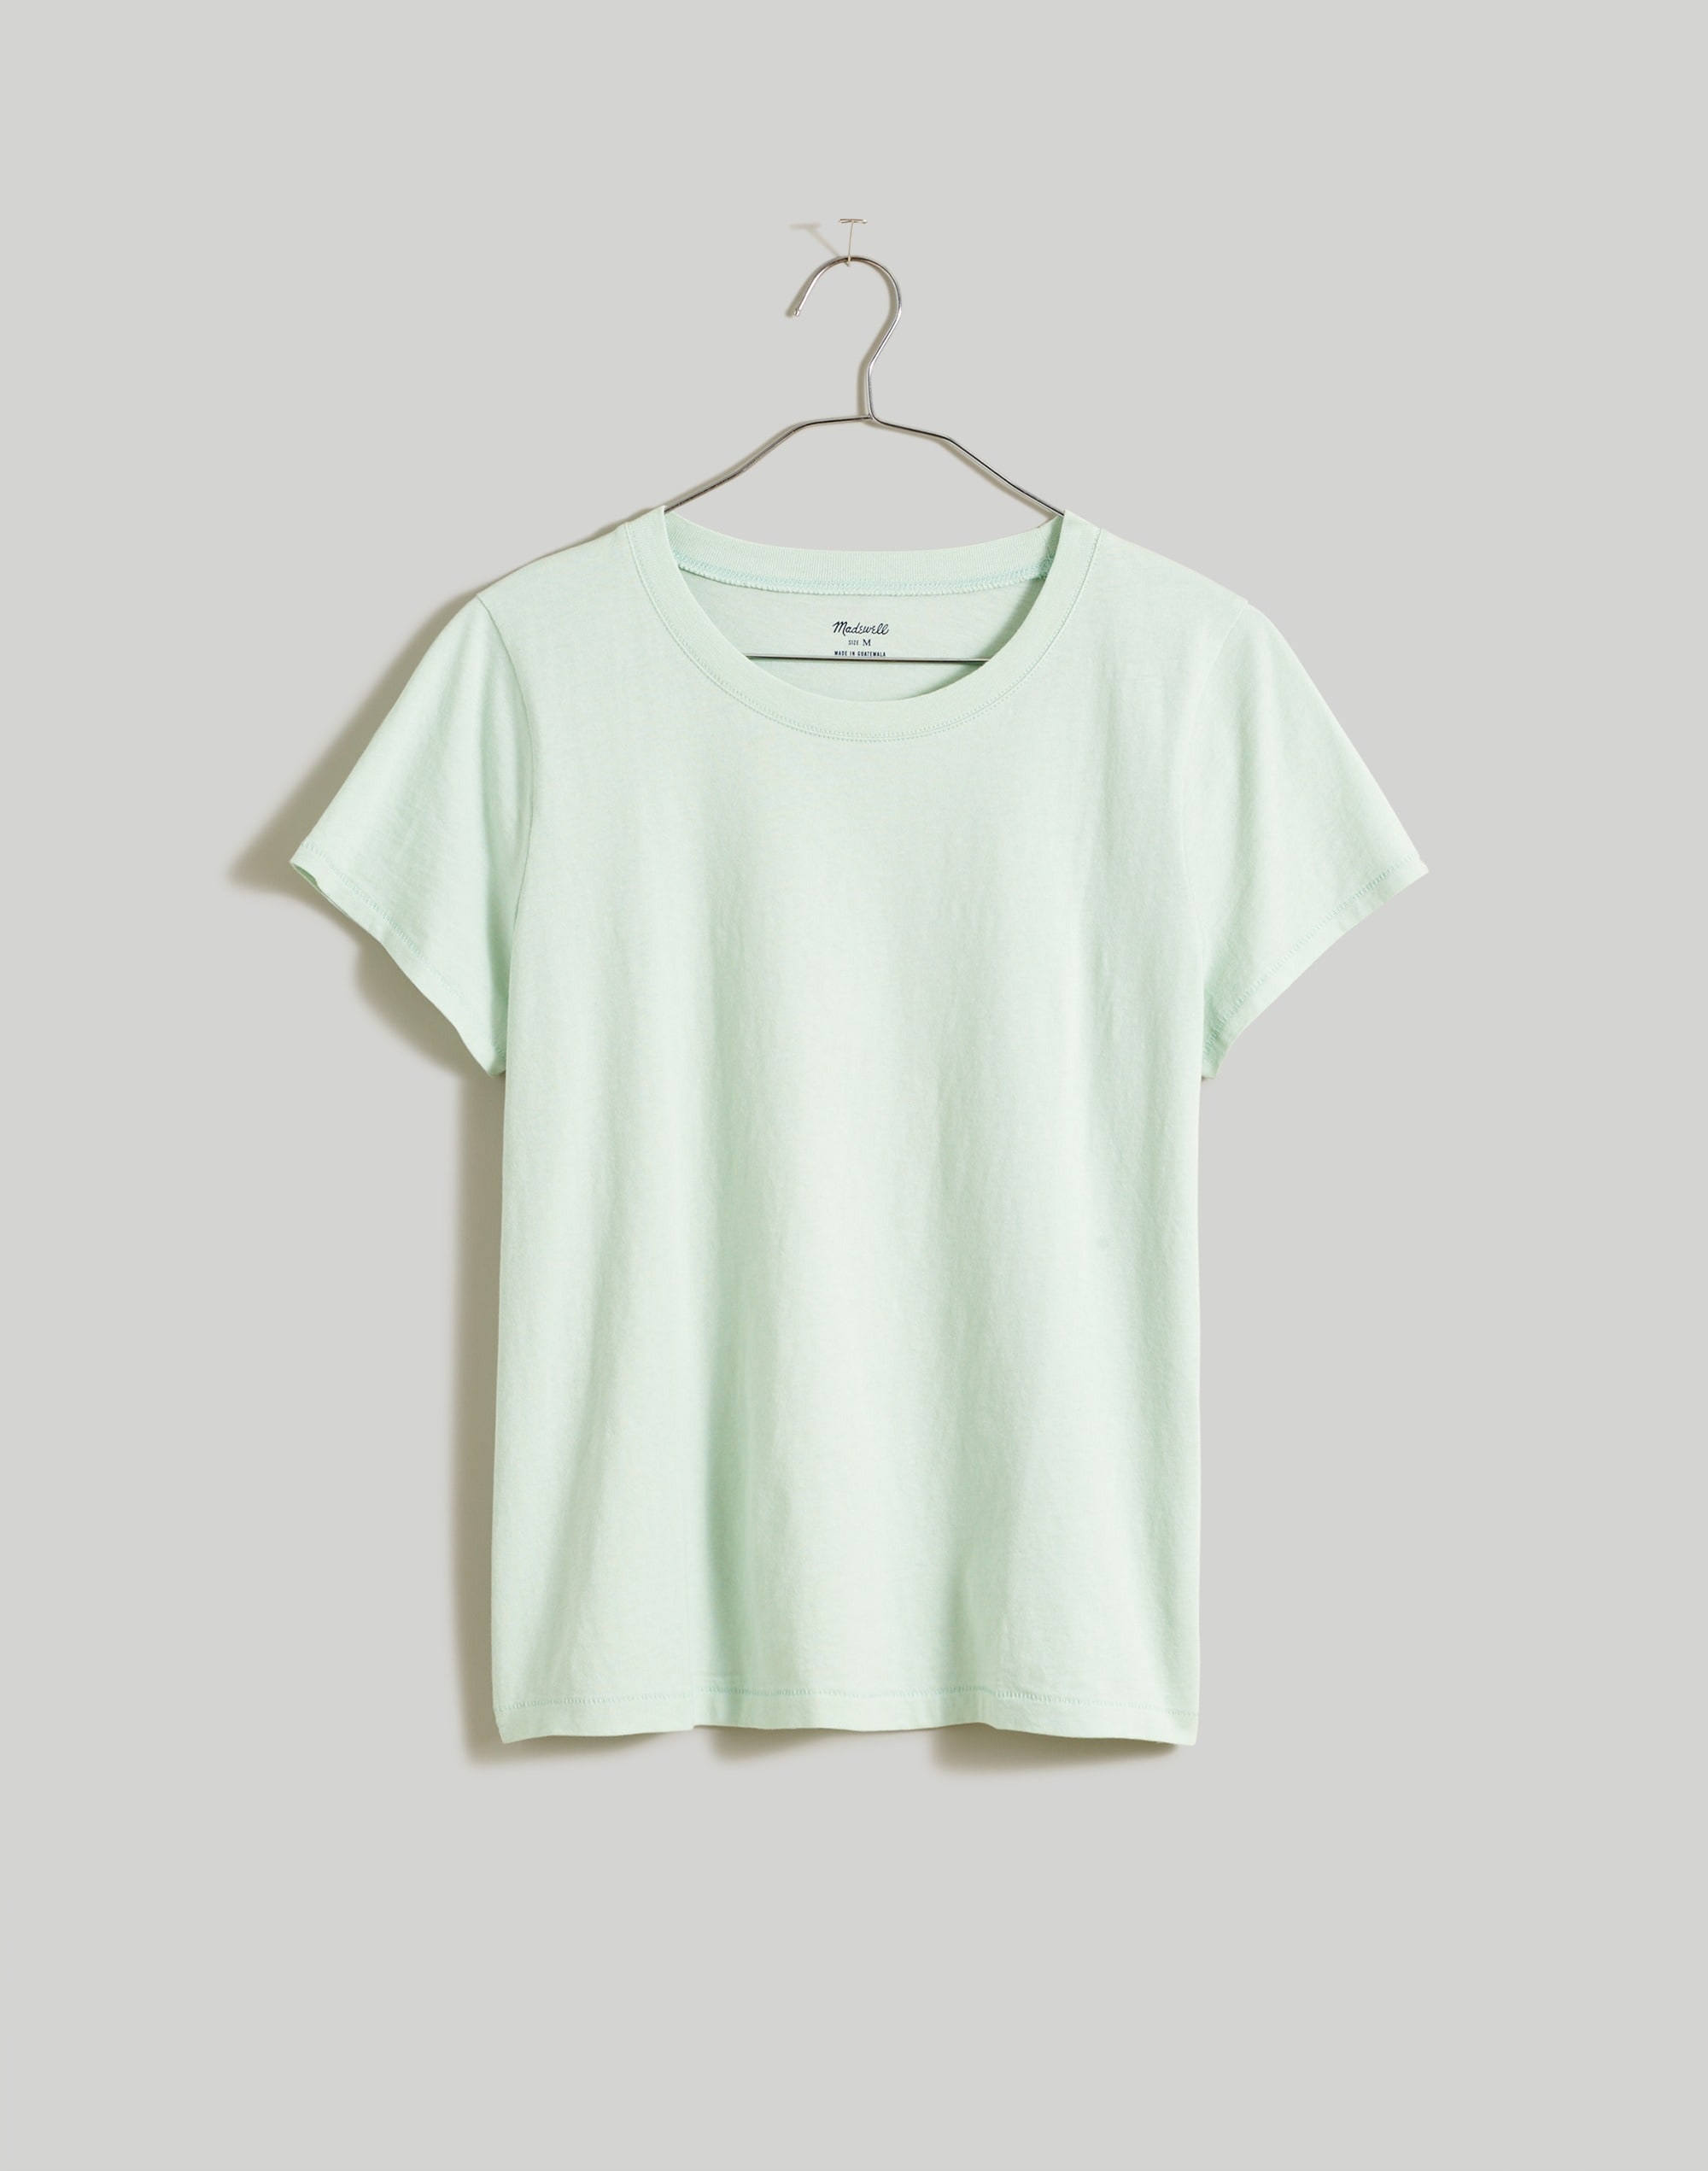 Mw Northside Vintage Tee In Iced Mint